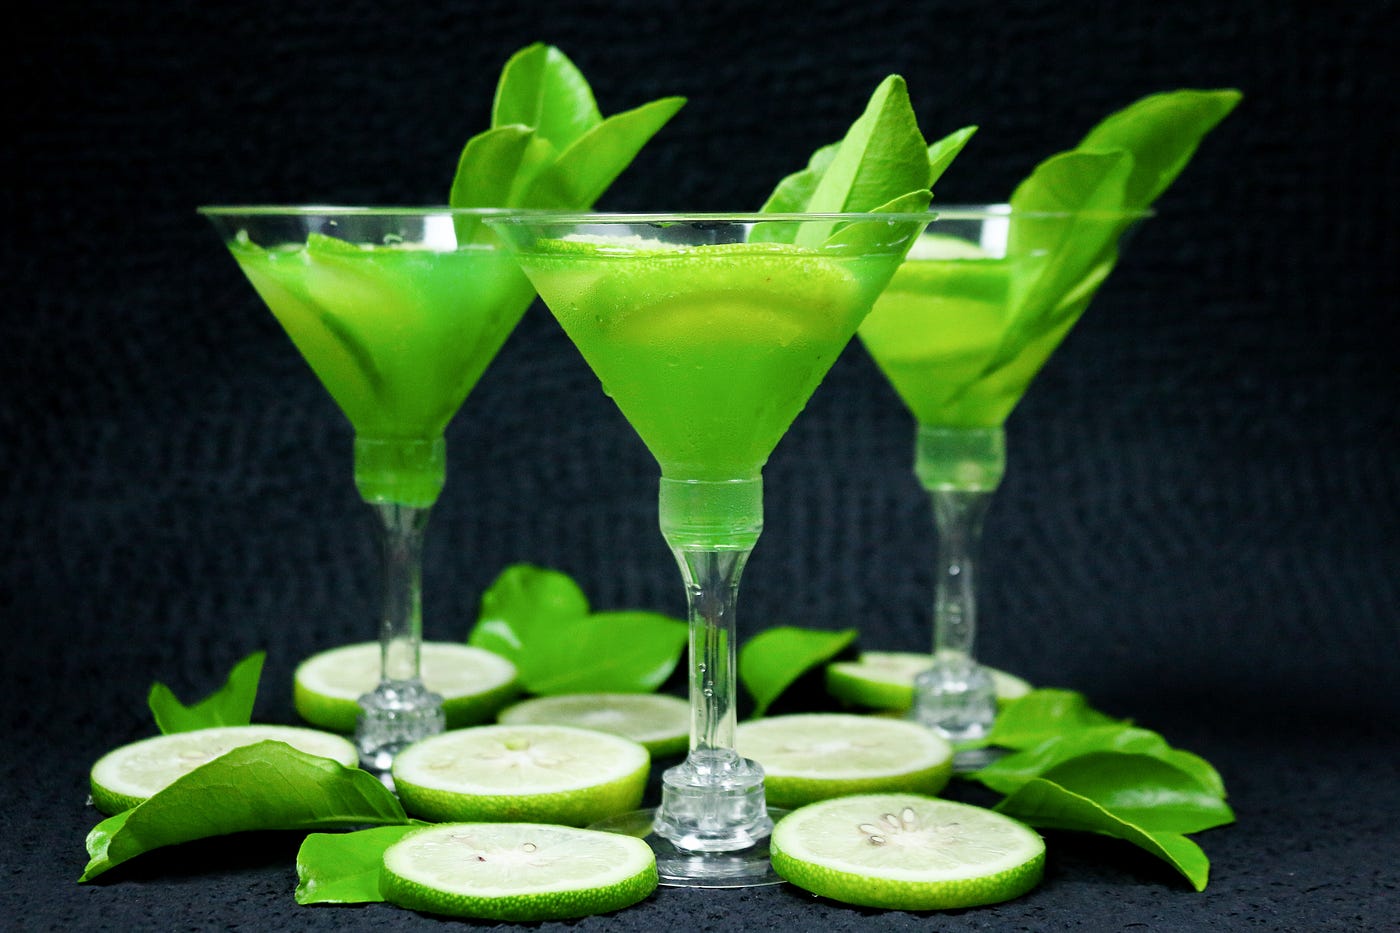 3 lime drinks in champagne style glasses lined up against a dark background.